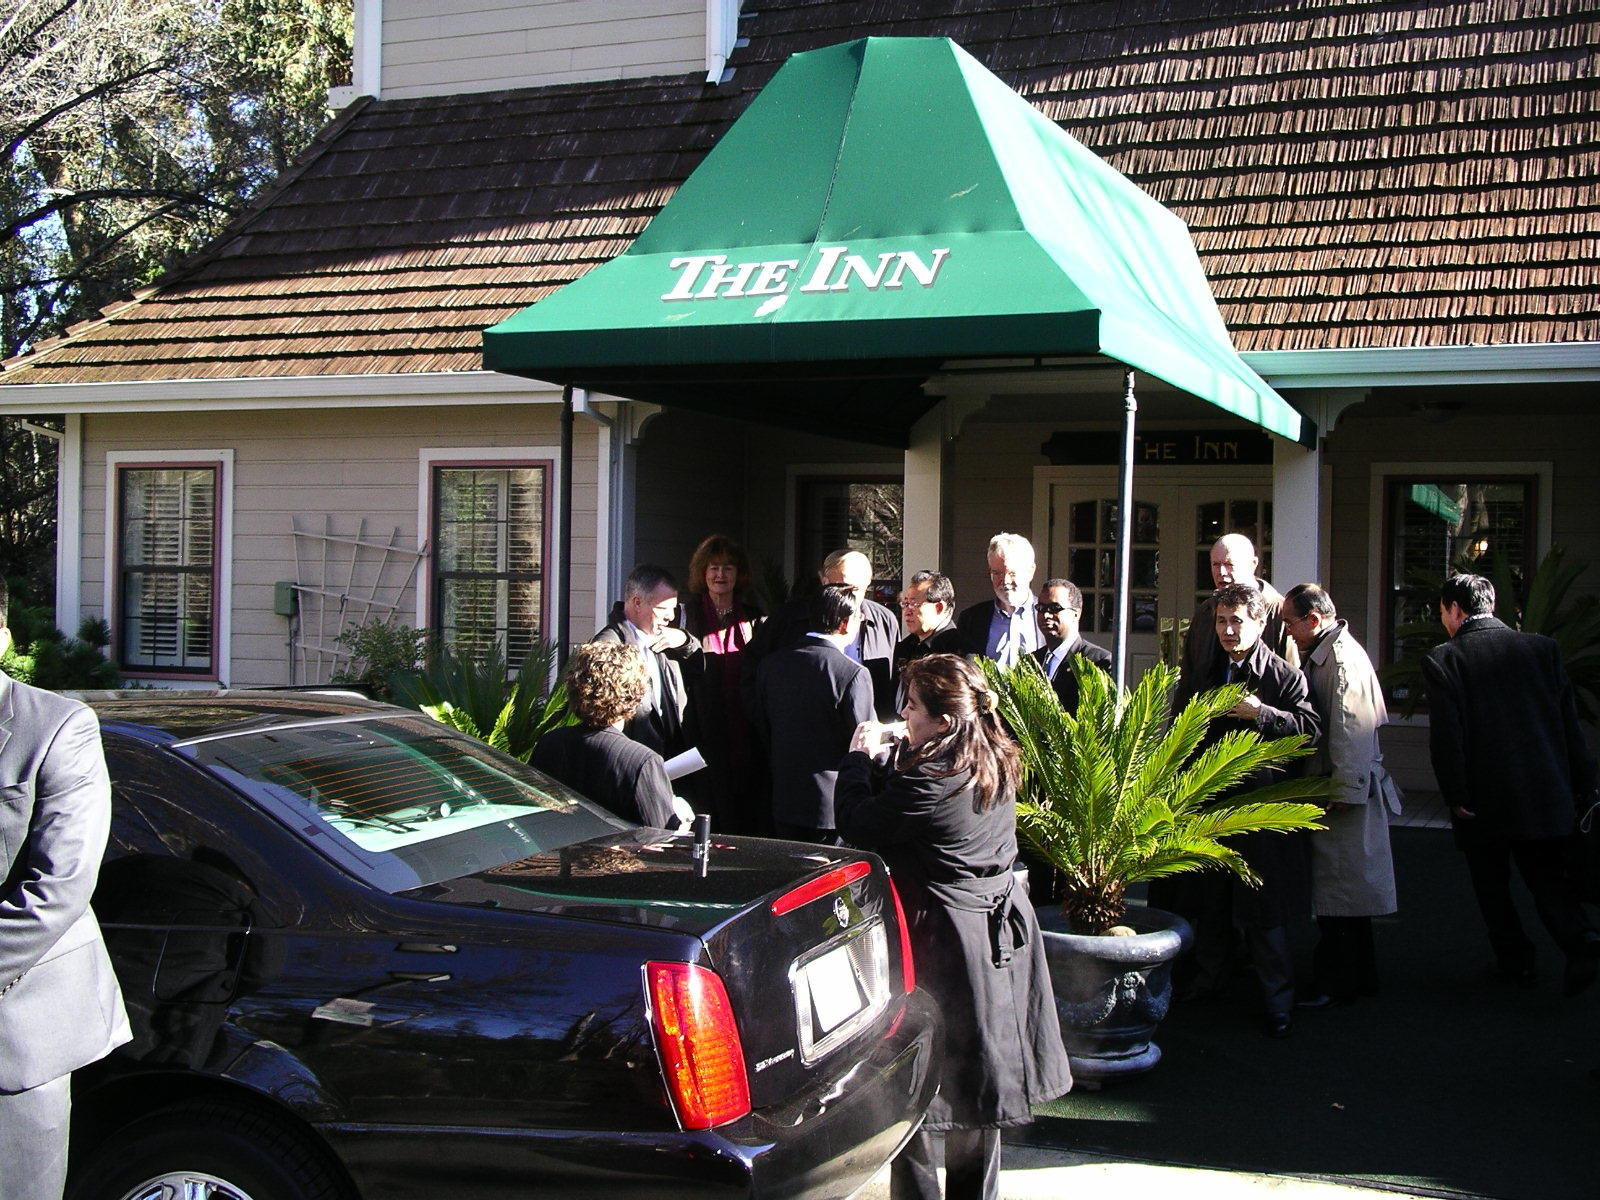 People crowding in the inn entryway with a black vehicle parked by Kim Gye Gwan delegation arrives in Saratoga for meeting with Stanford University group.